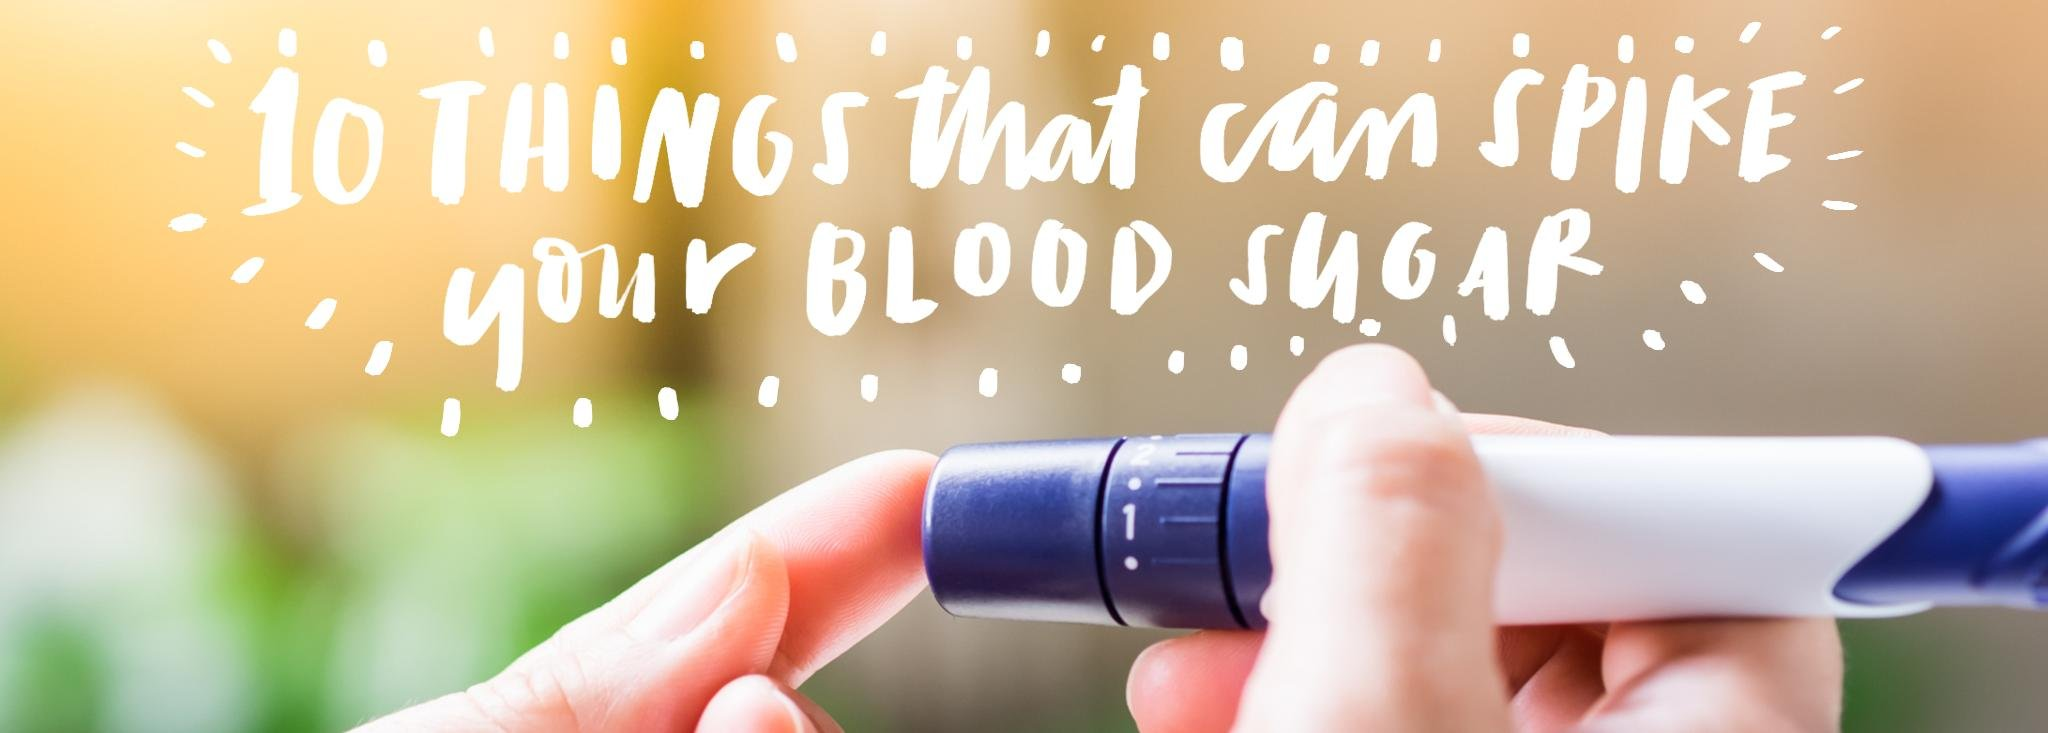 What Can Raise Your Blood Sugar Levels?